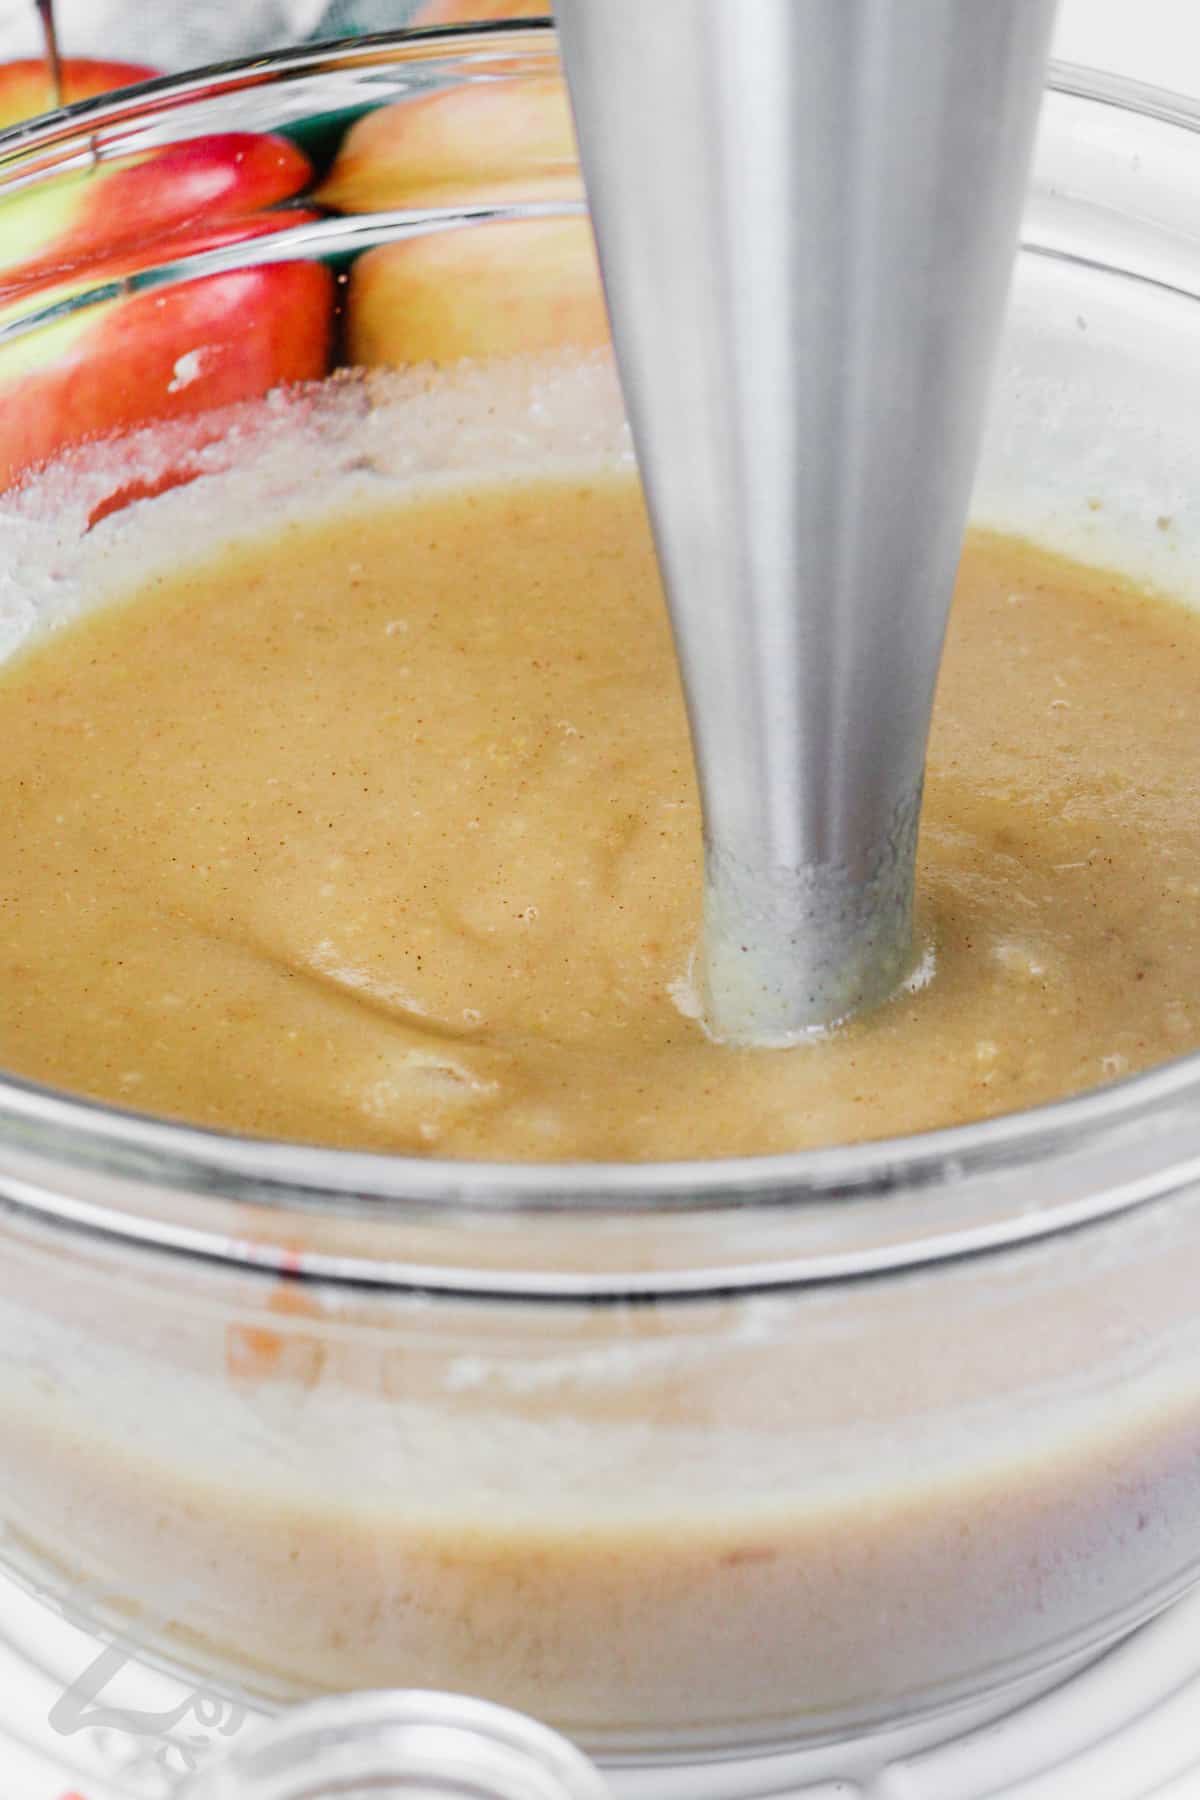 Mashed apples being pureed with an immersion blender to make homemade apple sauce